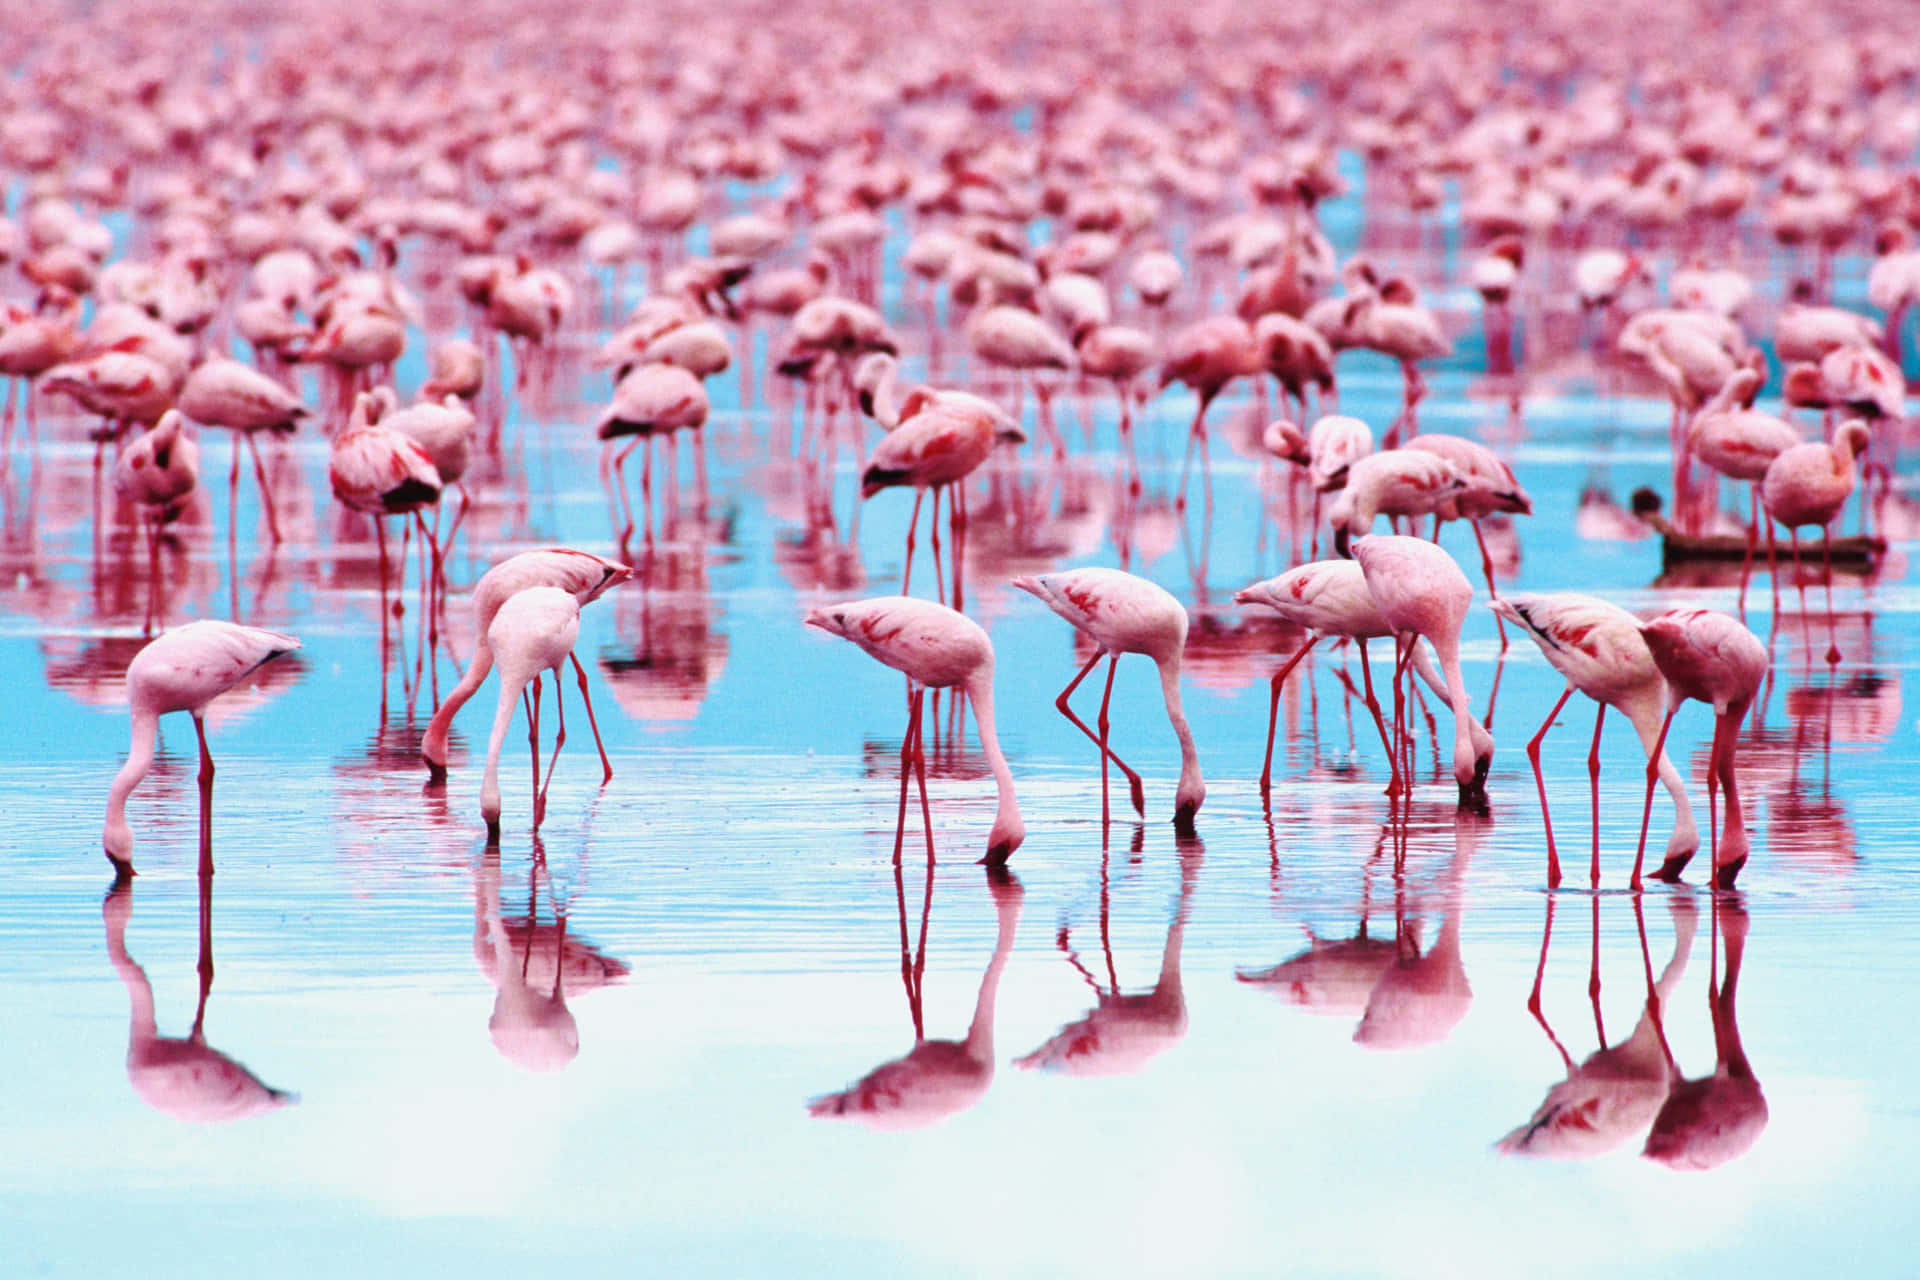 A flock of pink flamingos wading in a serene water setting Wallpaper